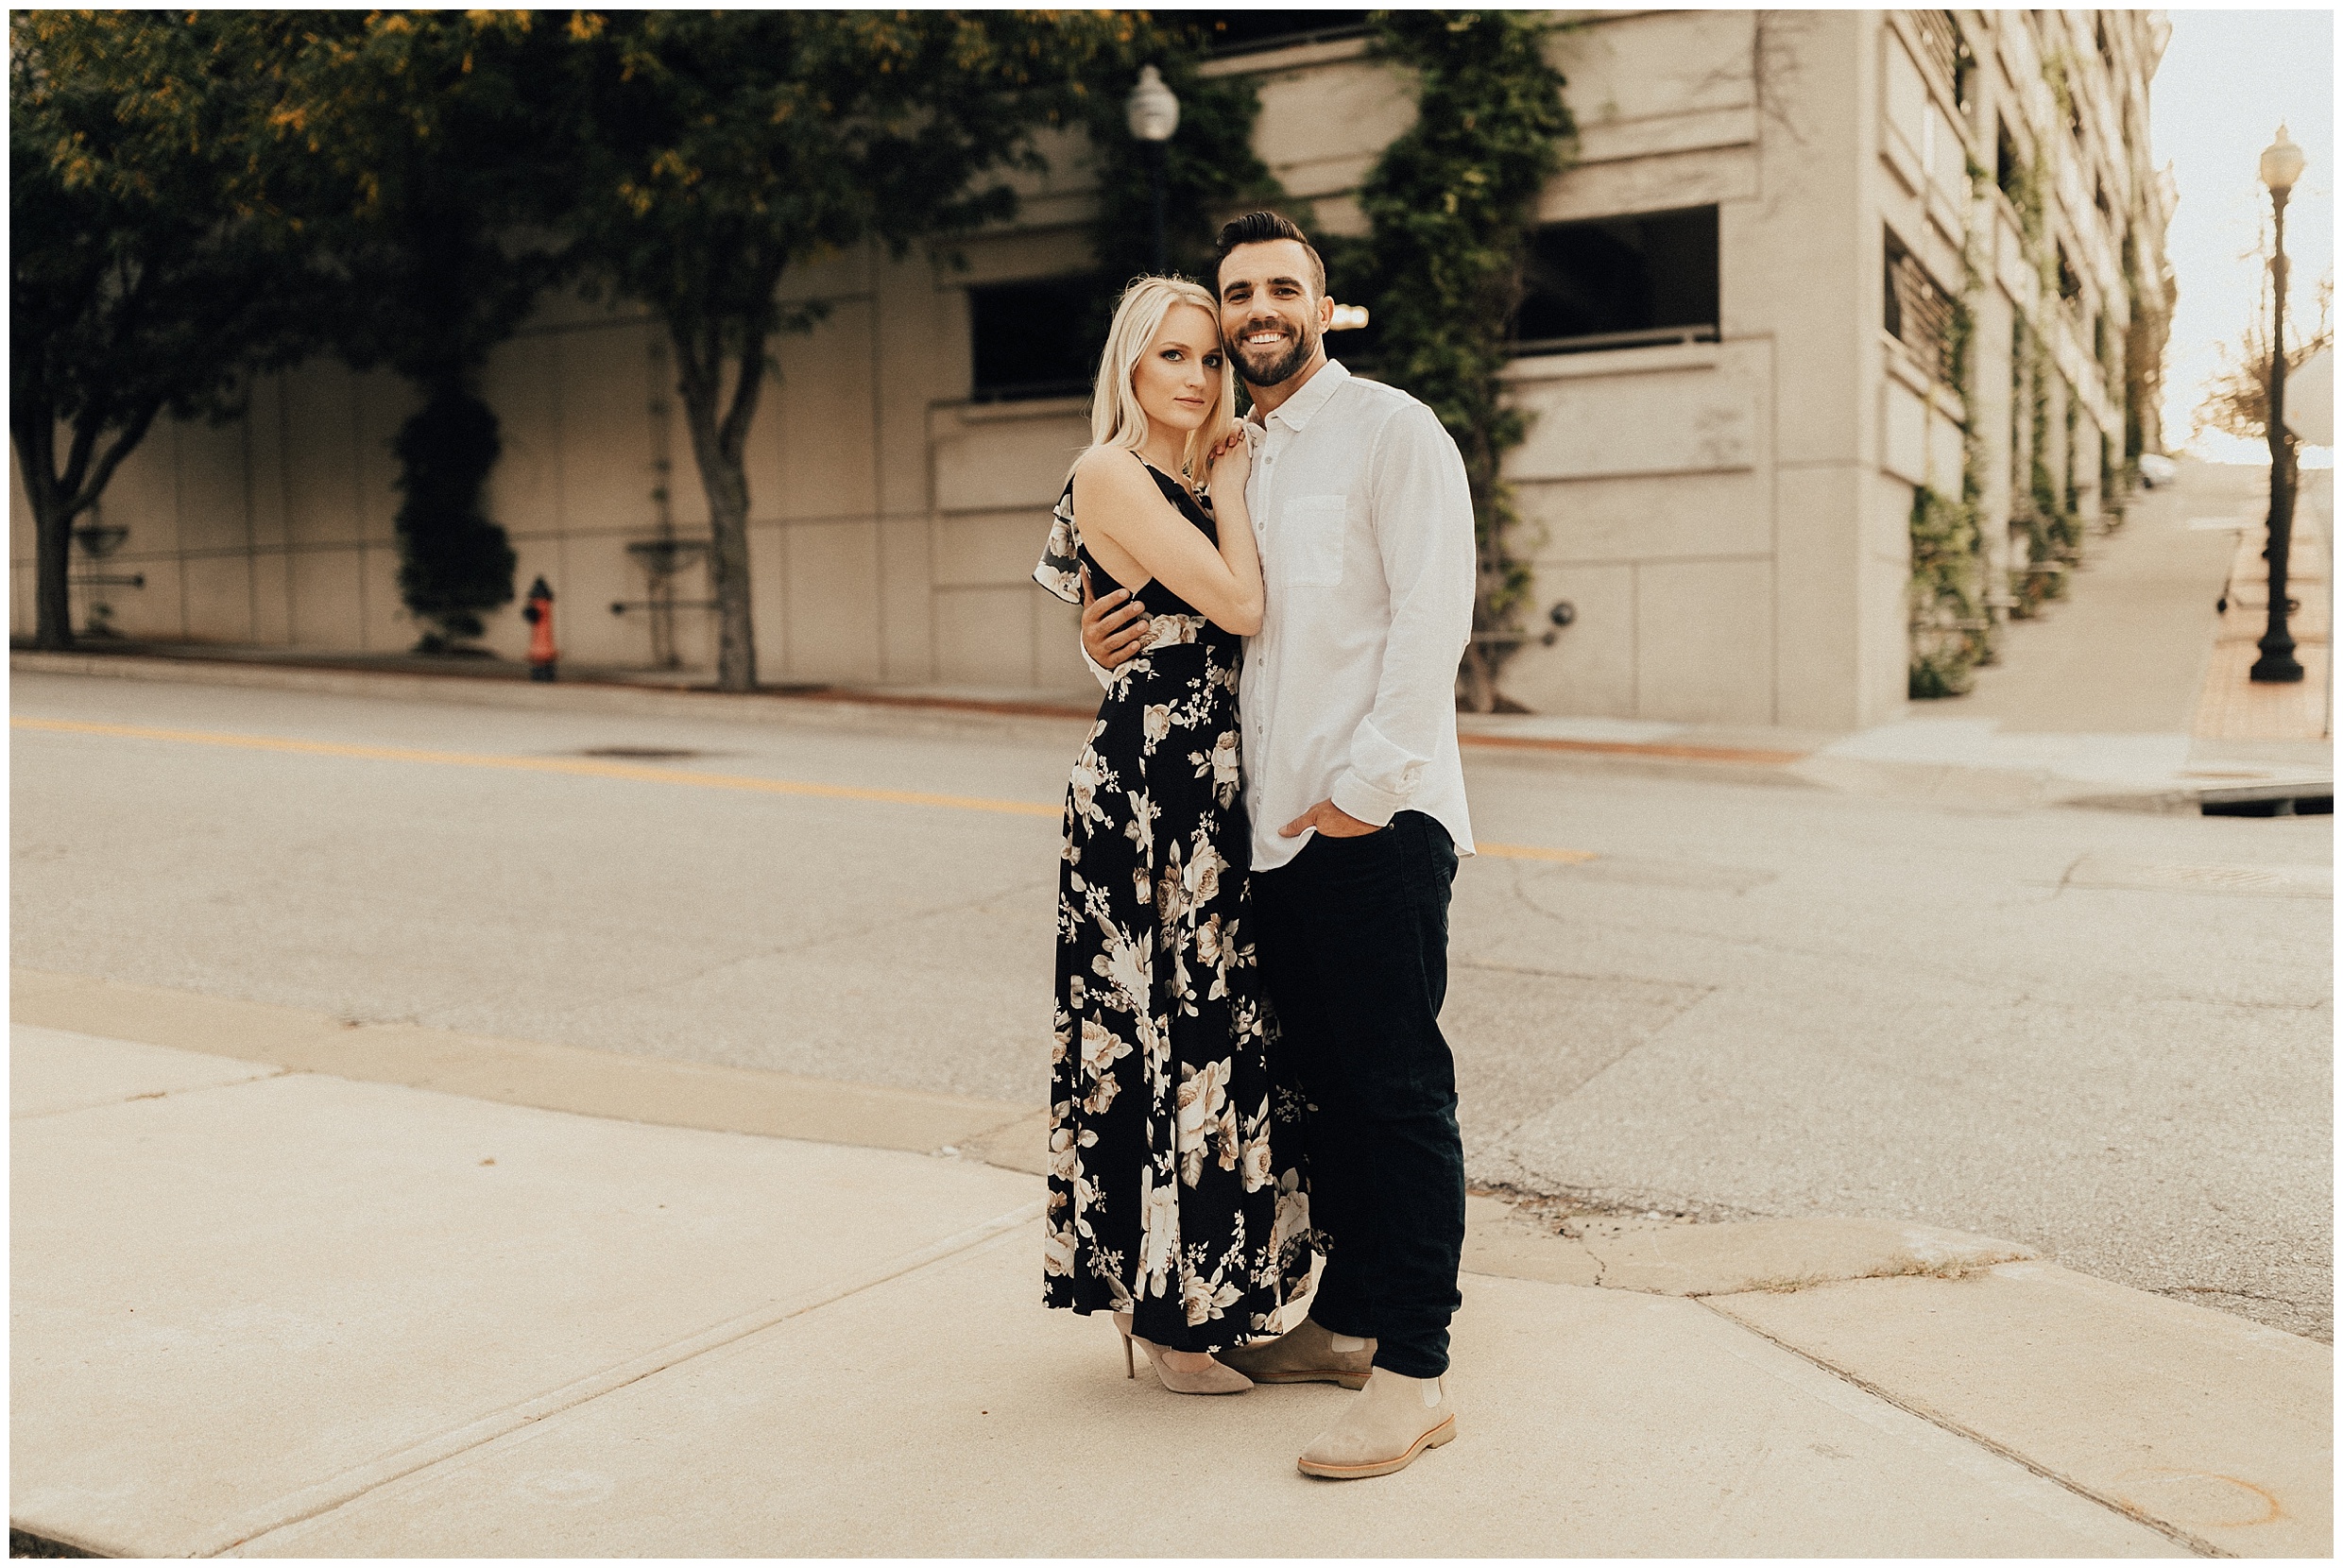 Engagement photos, what to wear for engagement session, save the date, couples posing, engagement photo ideas, Kansas City engagement photos, Kansas city engagement photographer, downtown Kansas City engagement photos, river market engagement photos, downtown Kansas City engagement session, river market engagement session